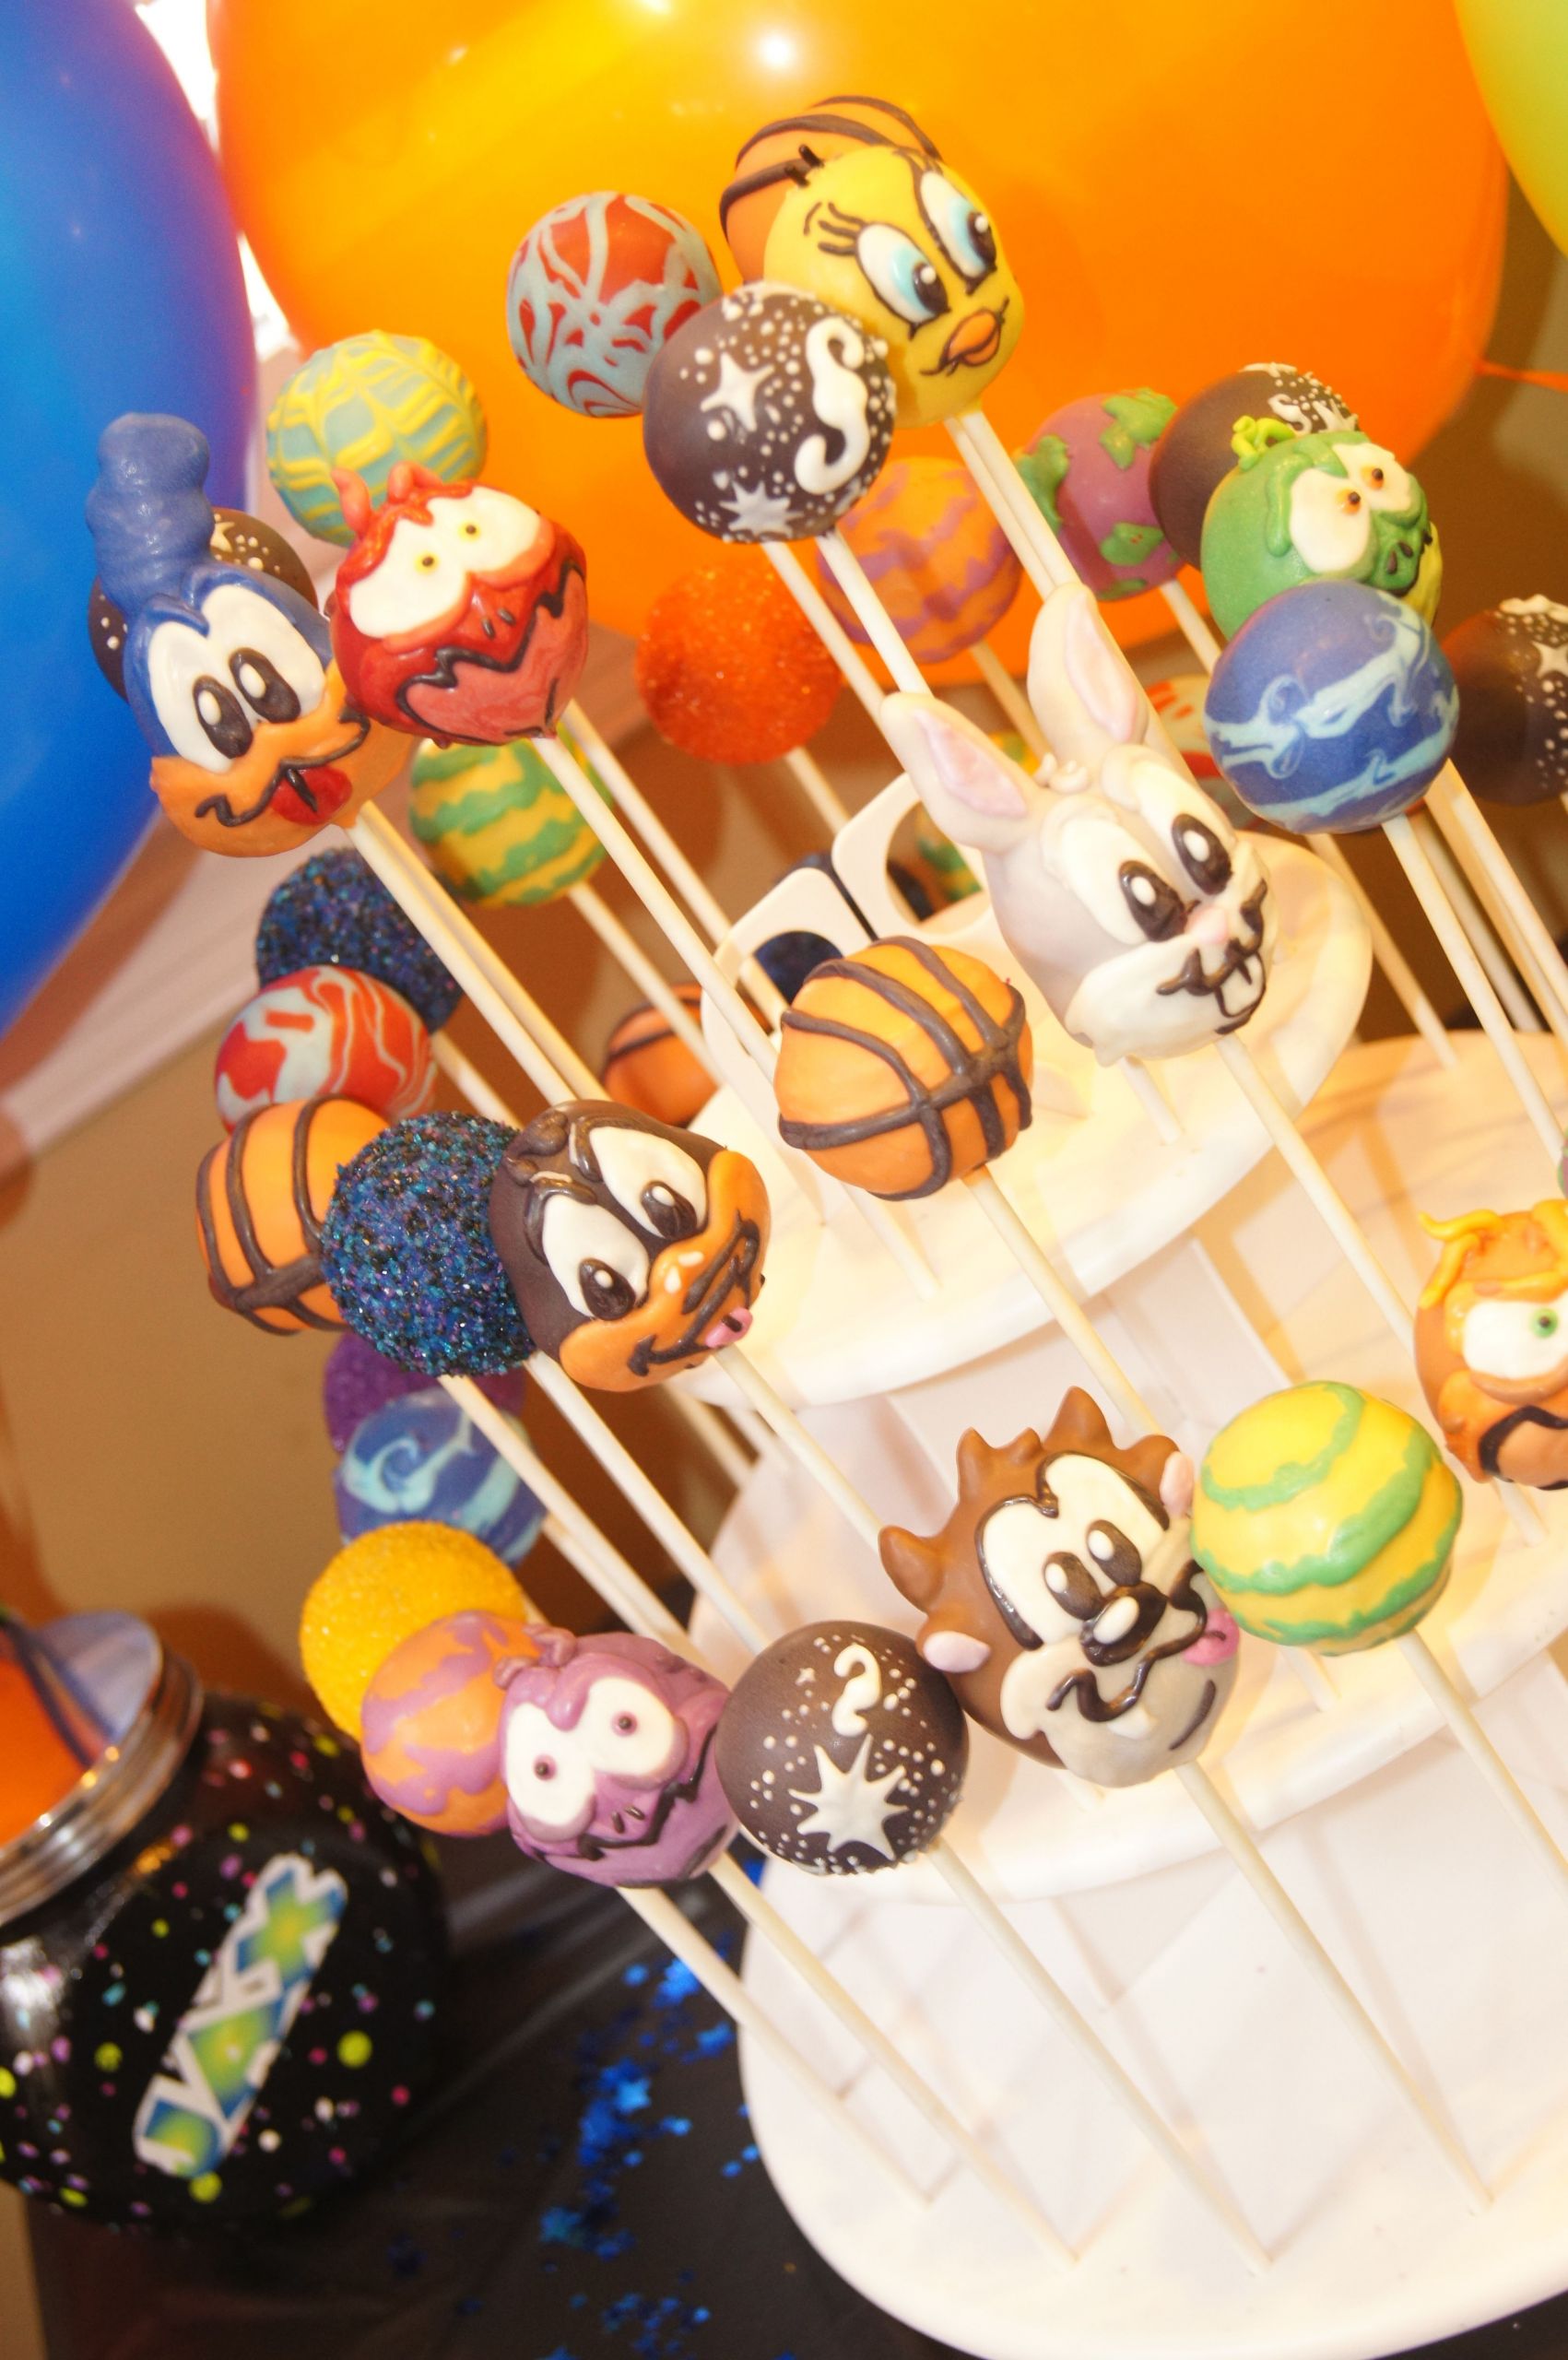 Baby Looney Tunes Party Decorations
 Dale City VA With images